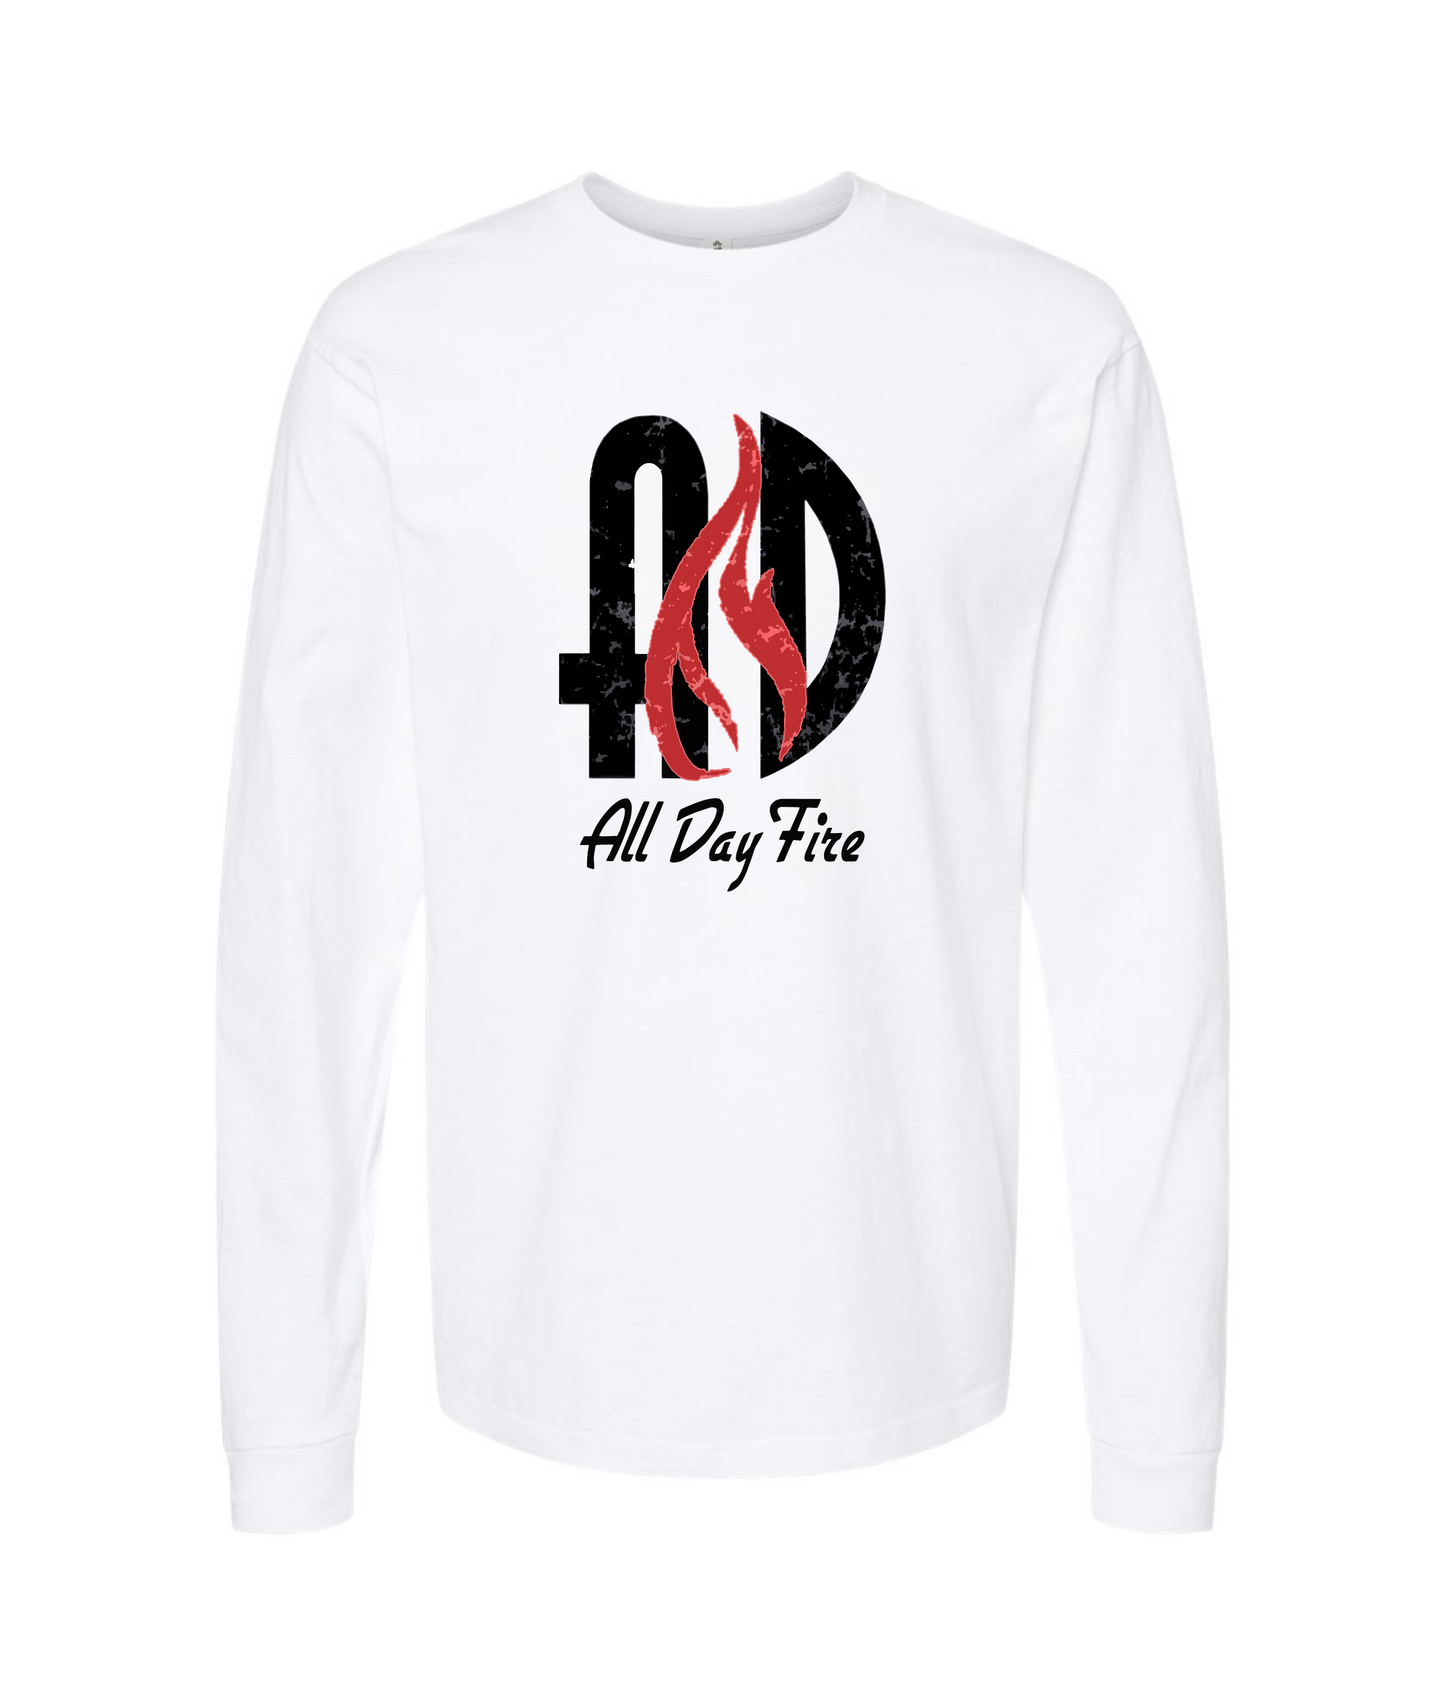 All Day Fire Logo Long Sleeve T